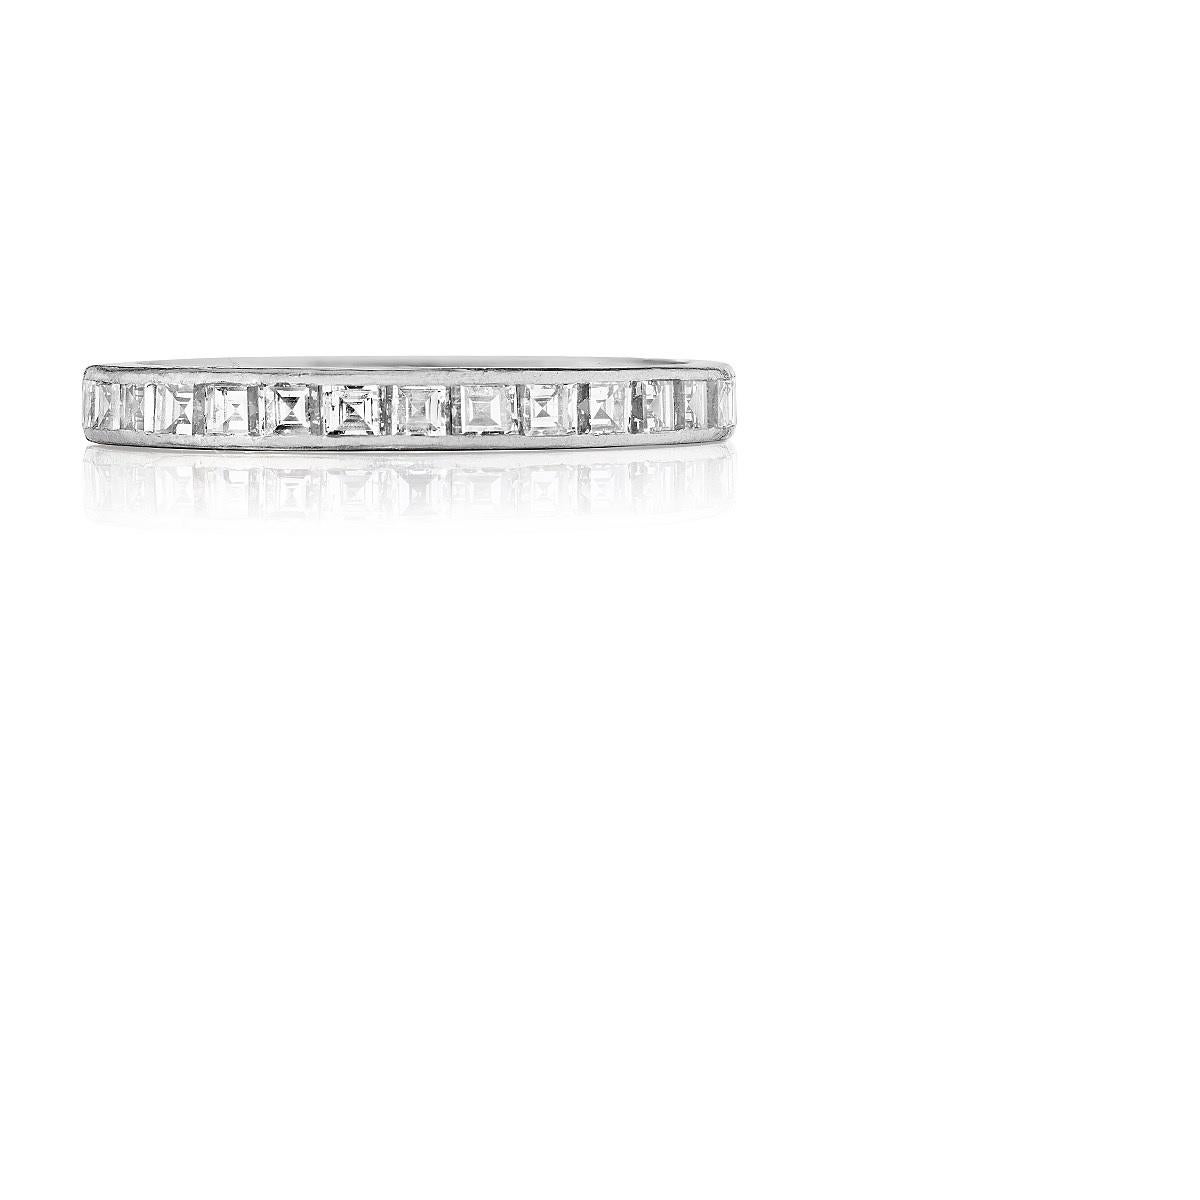 A platinum ring with diamonds by Tiffany & Co. This band has 32 Asscher cut diamonds with an approximate total weight of 3.20 carats. They have a G/H color and VS clarity grade. Circa 1970's.

Signed, 